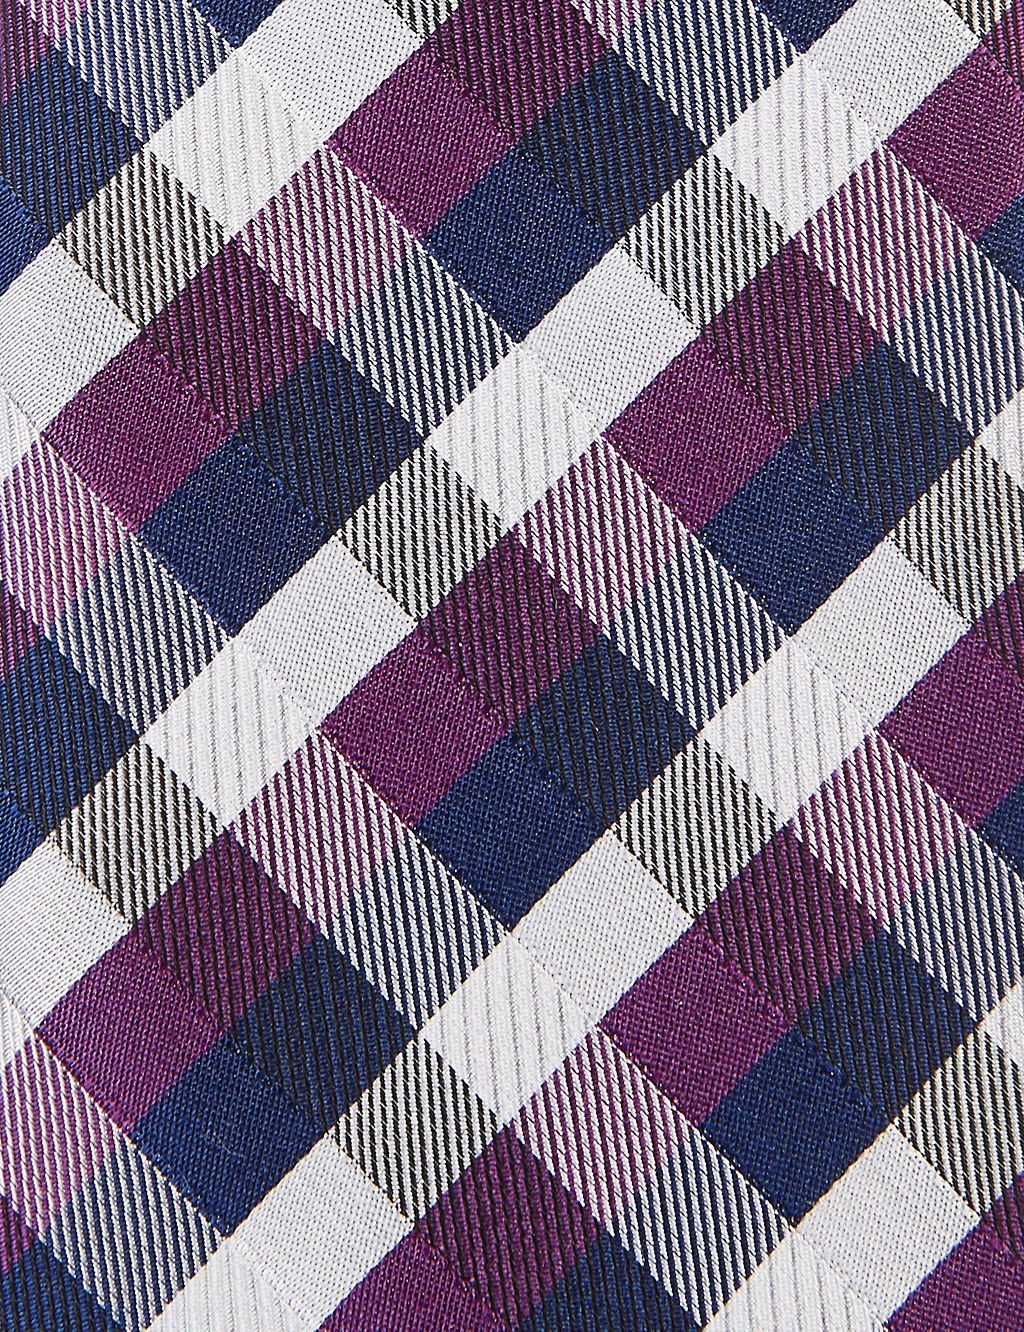 Pure Silk Gingham Checked Tie 2 of 3